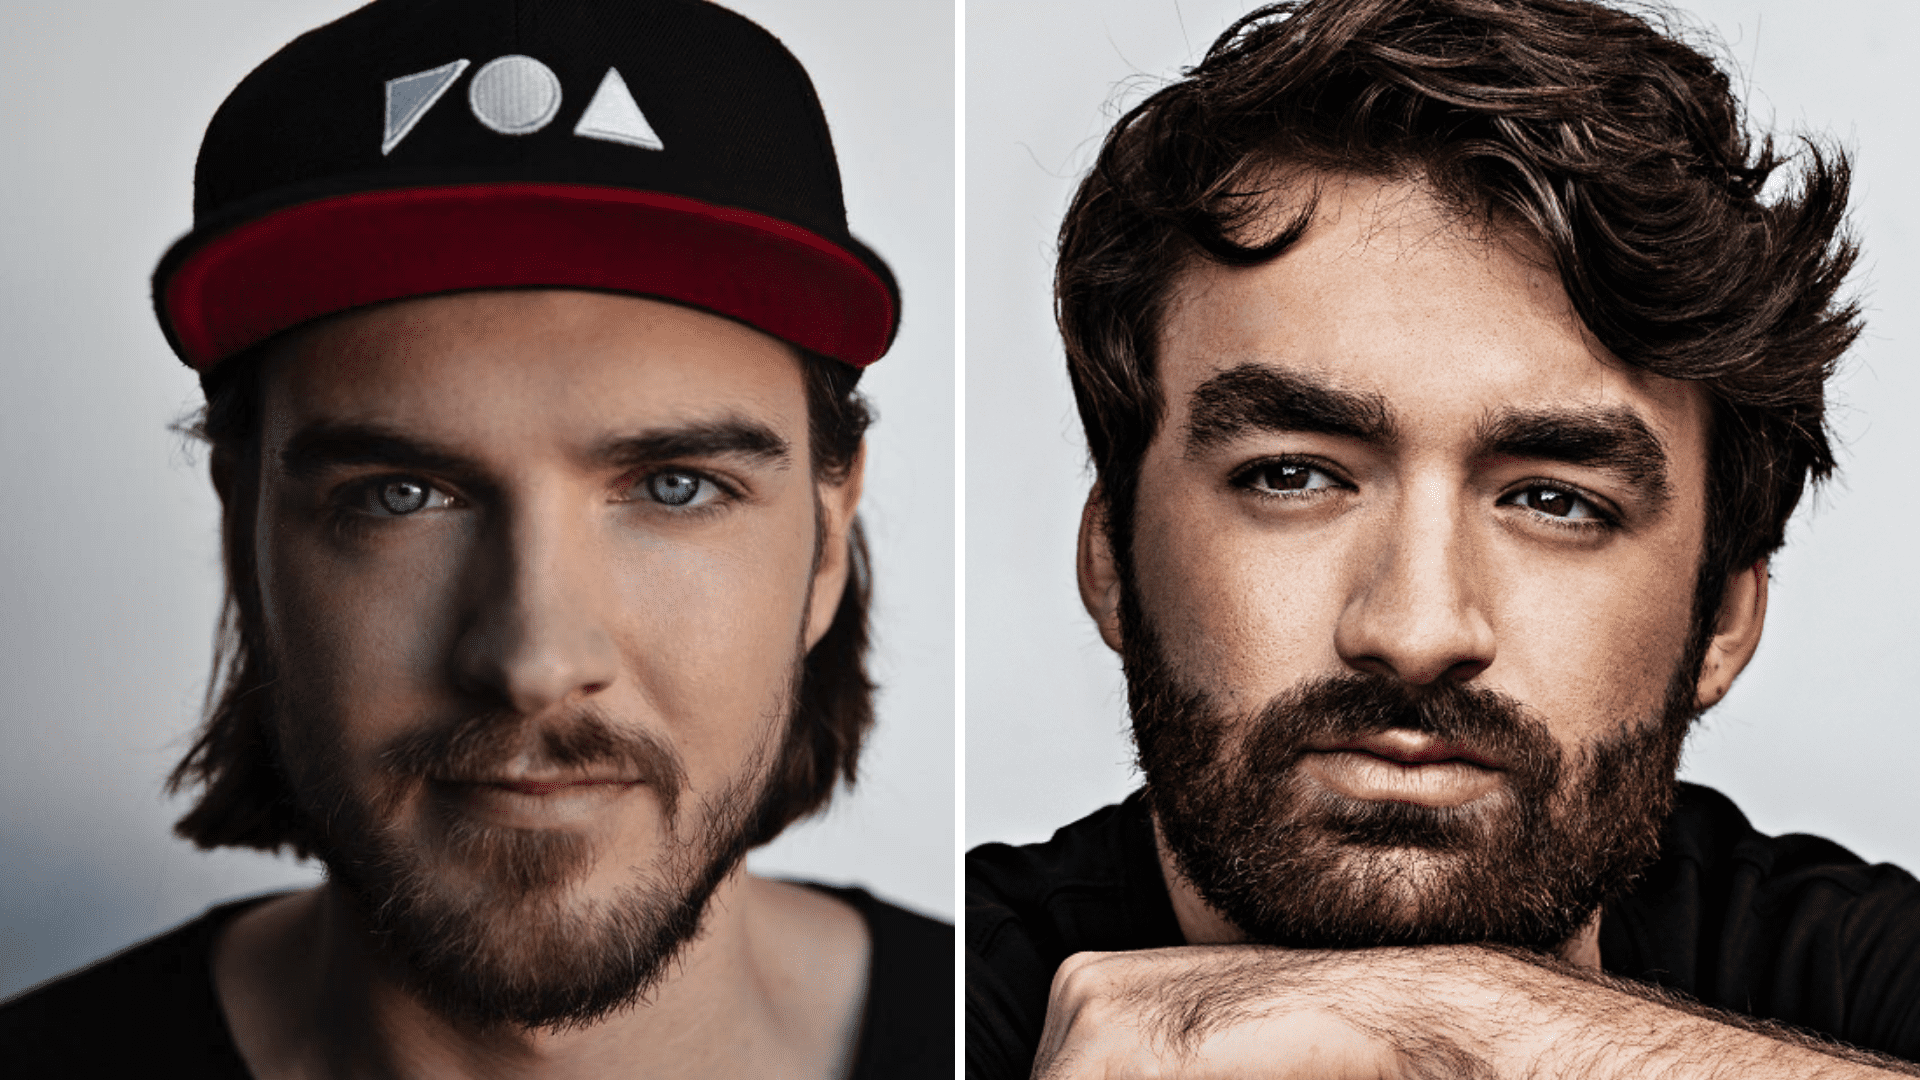 HI-LO and Reinier Zonneveld team up for explosive track ‘Saw of Olympus’: Listen